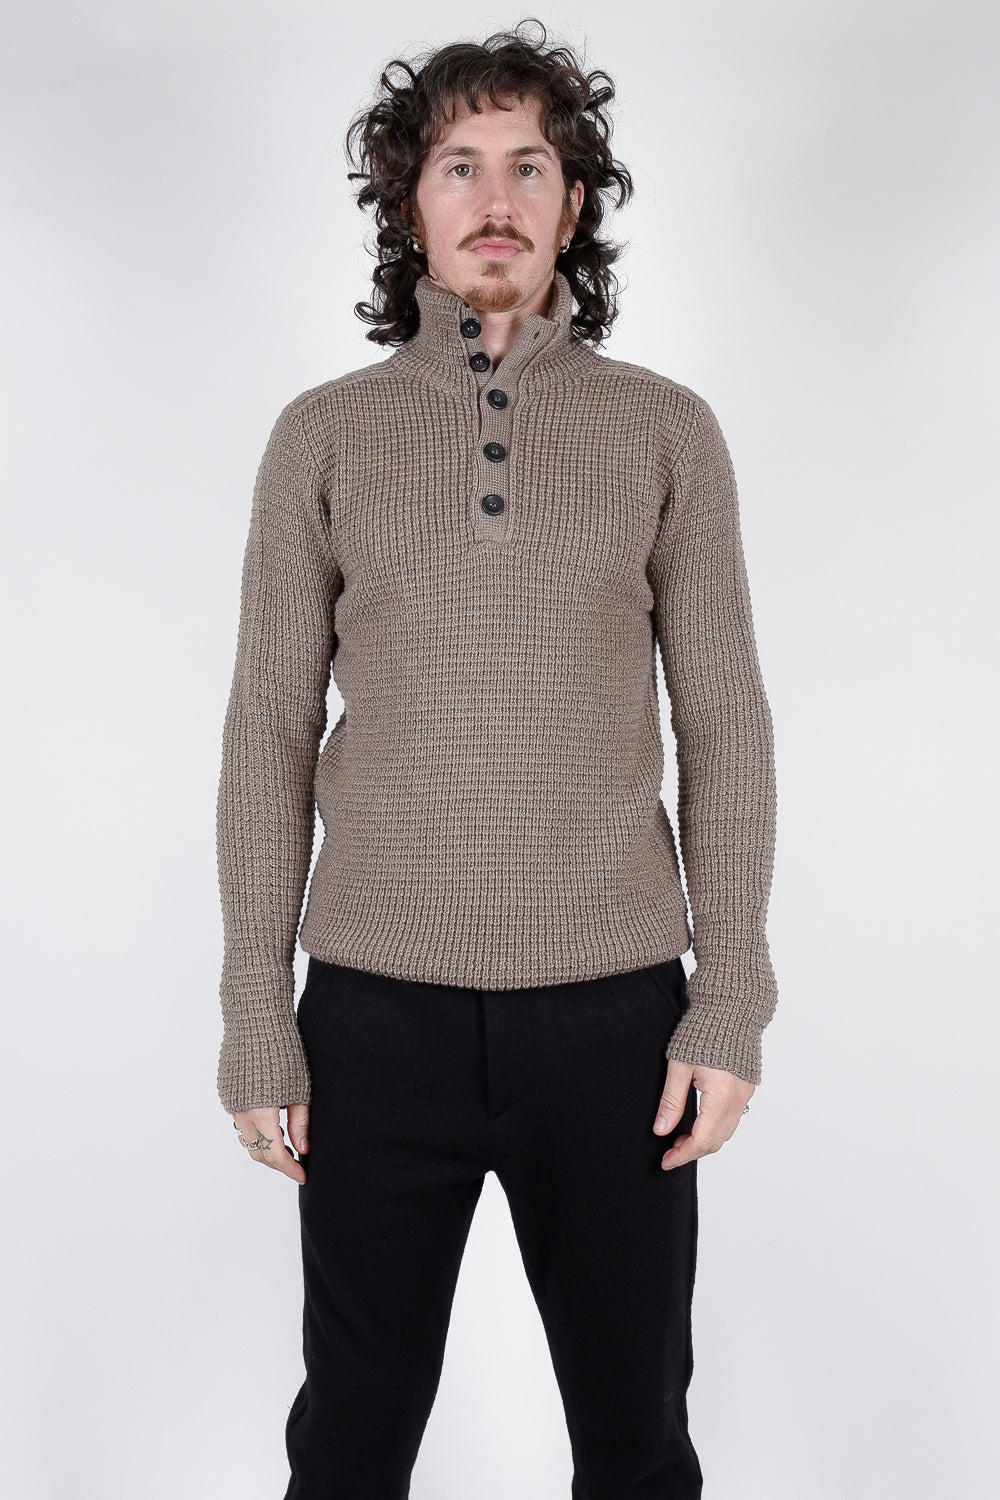 Buy the Hannes Roether Half Button Wool Sweater in Beige at Intro. Spend £50 for free UK delivery. Official stockists. We ship worldwide.